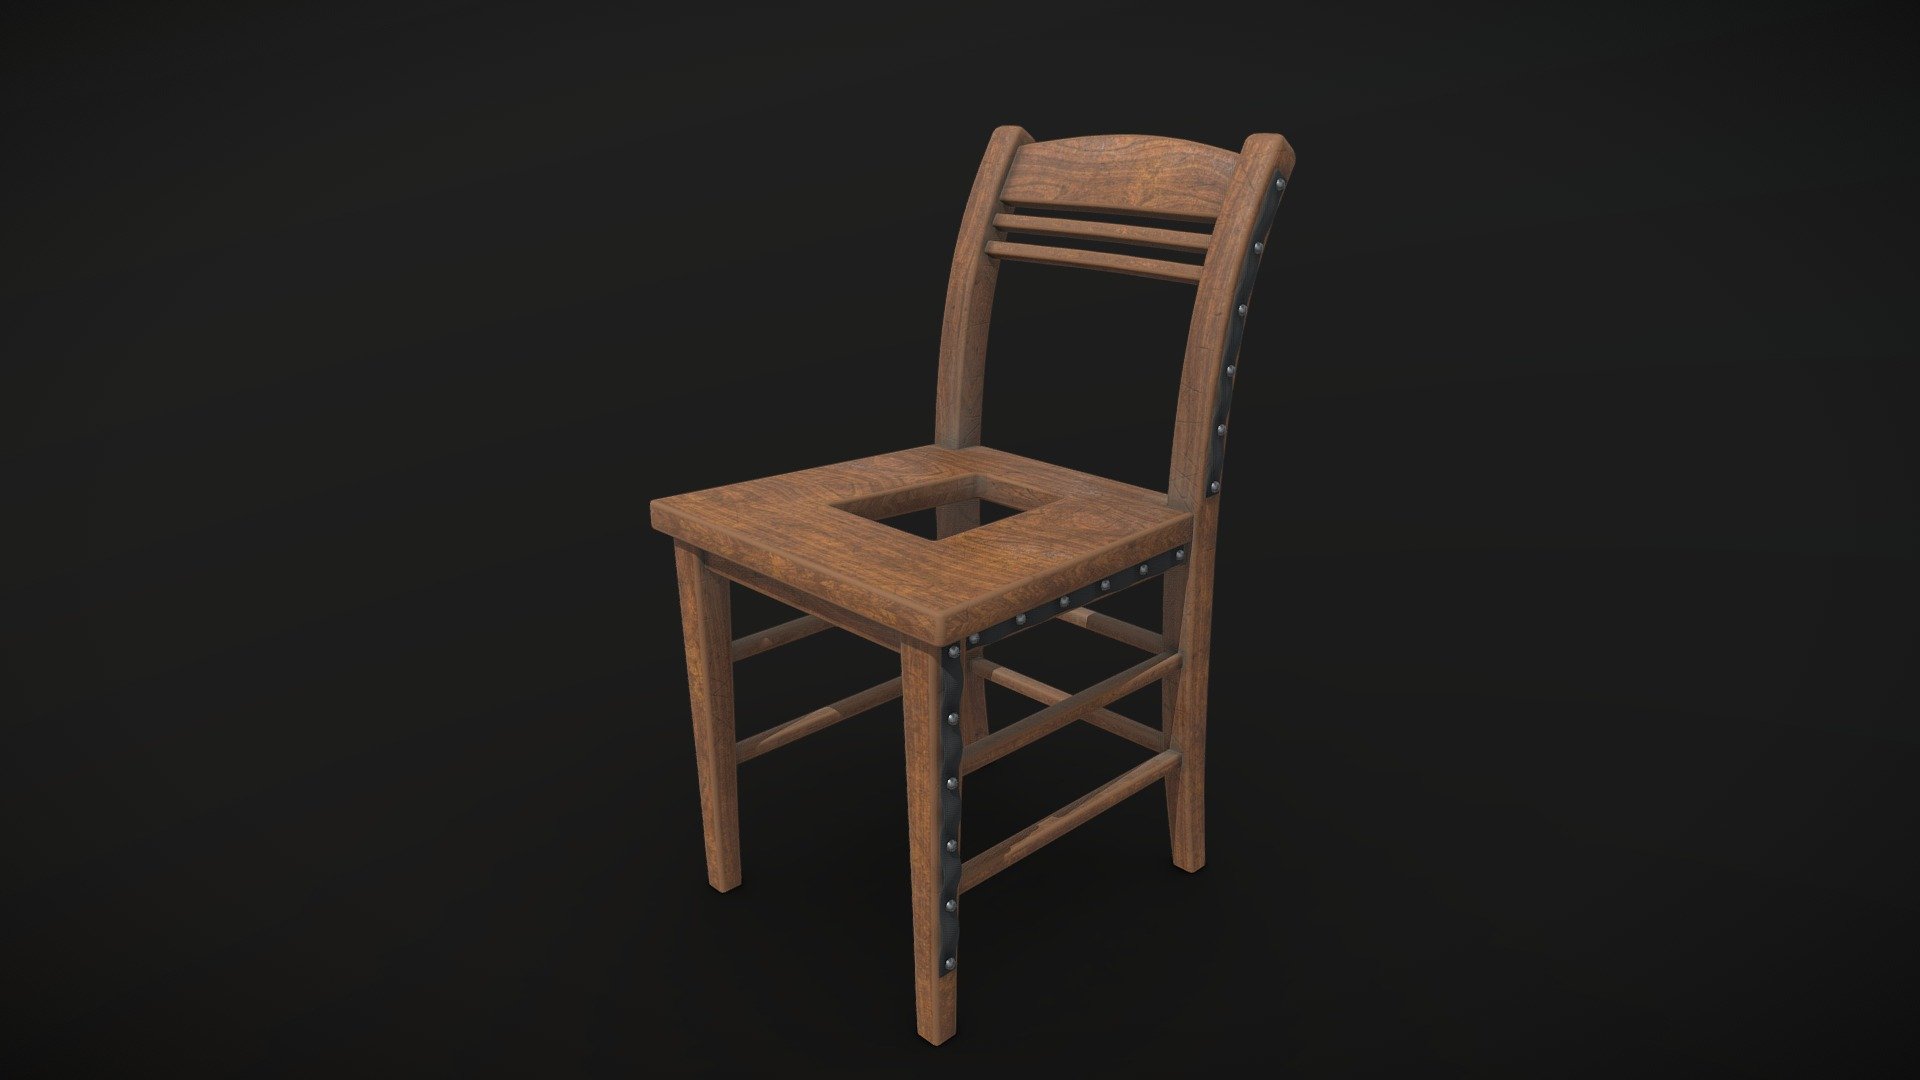 Interrogation wooden chair with molle like straps for ultimate tieing solutions

Modelend and unwarped in Blender, baked and textured in Substance Painter 3d model